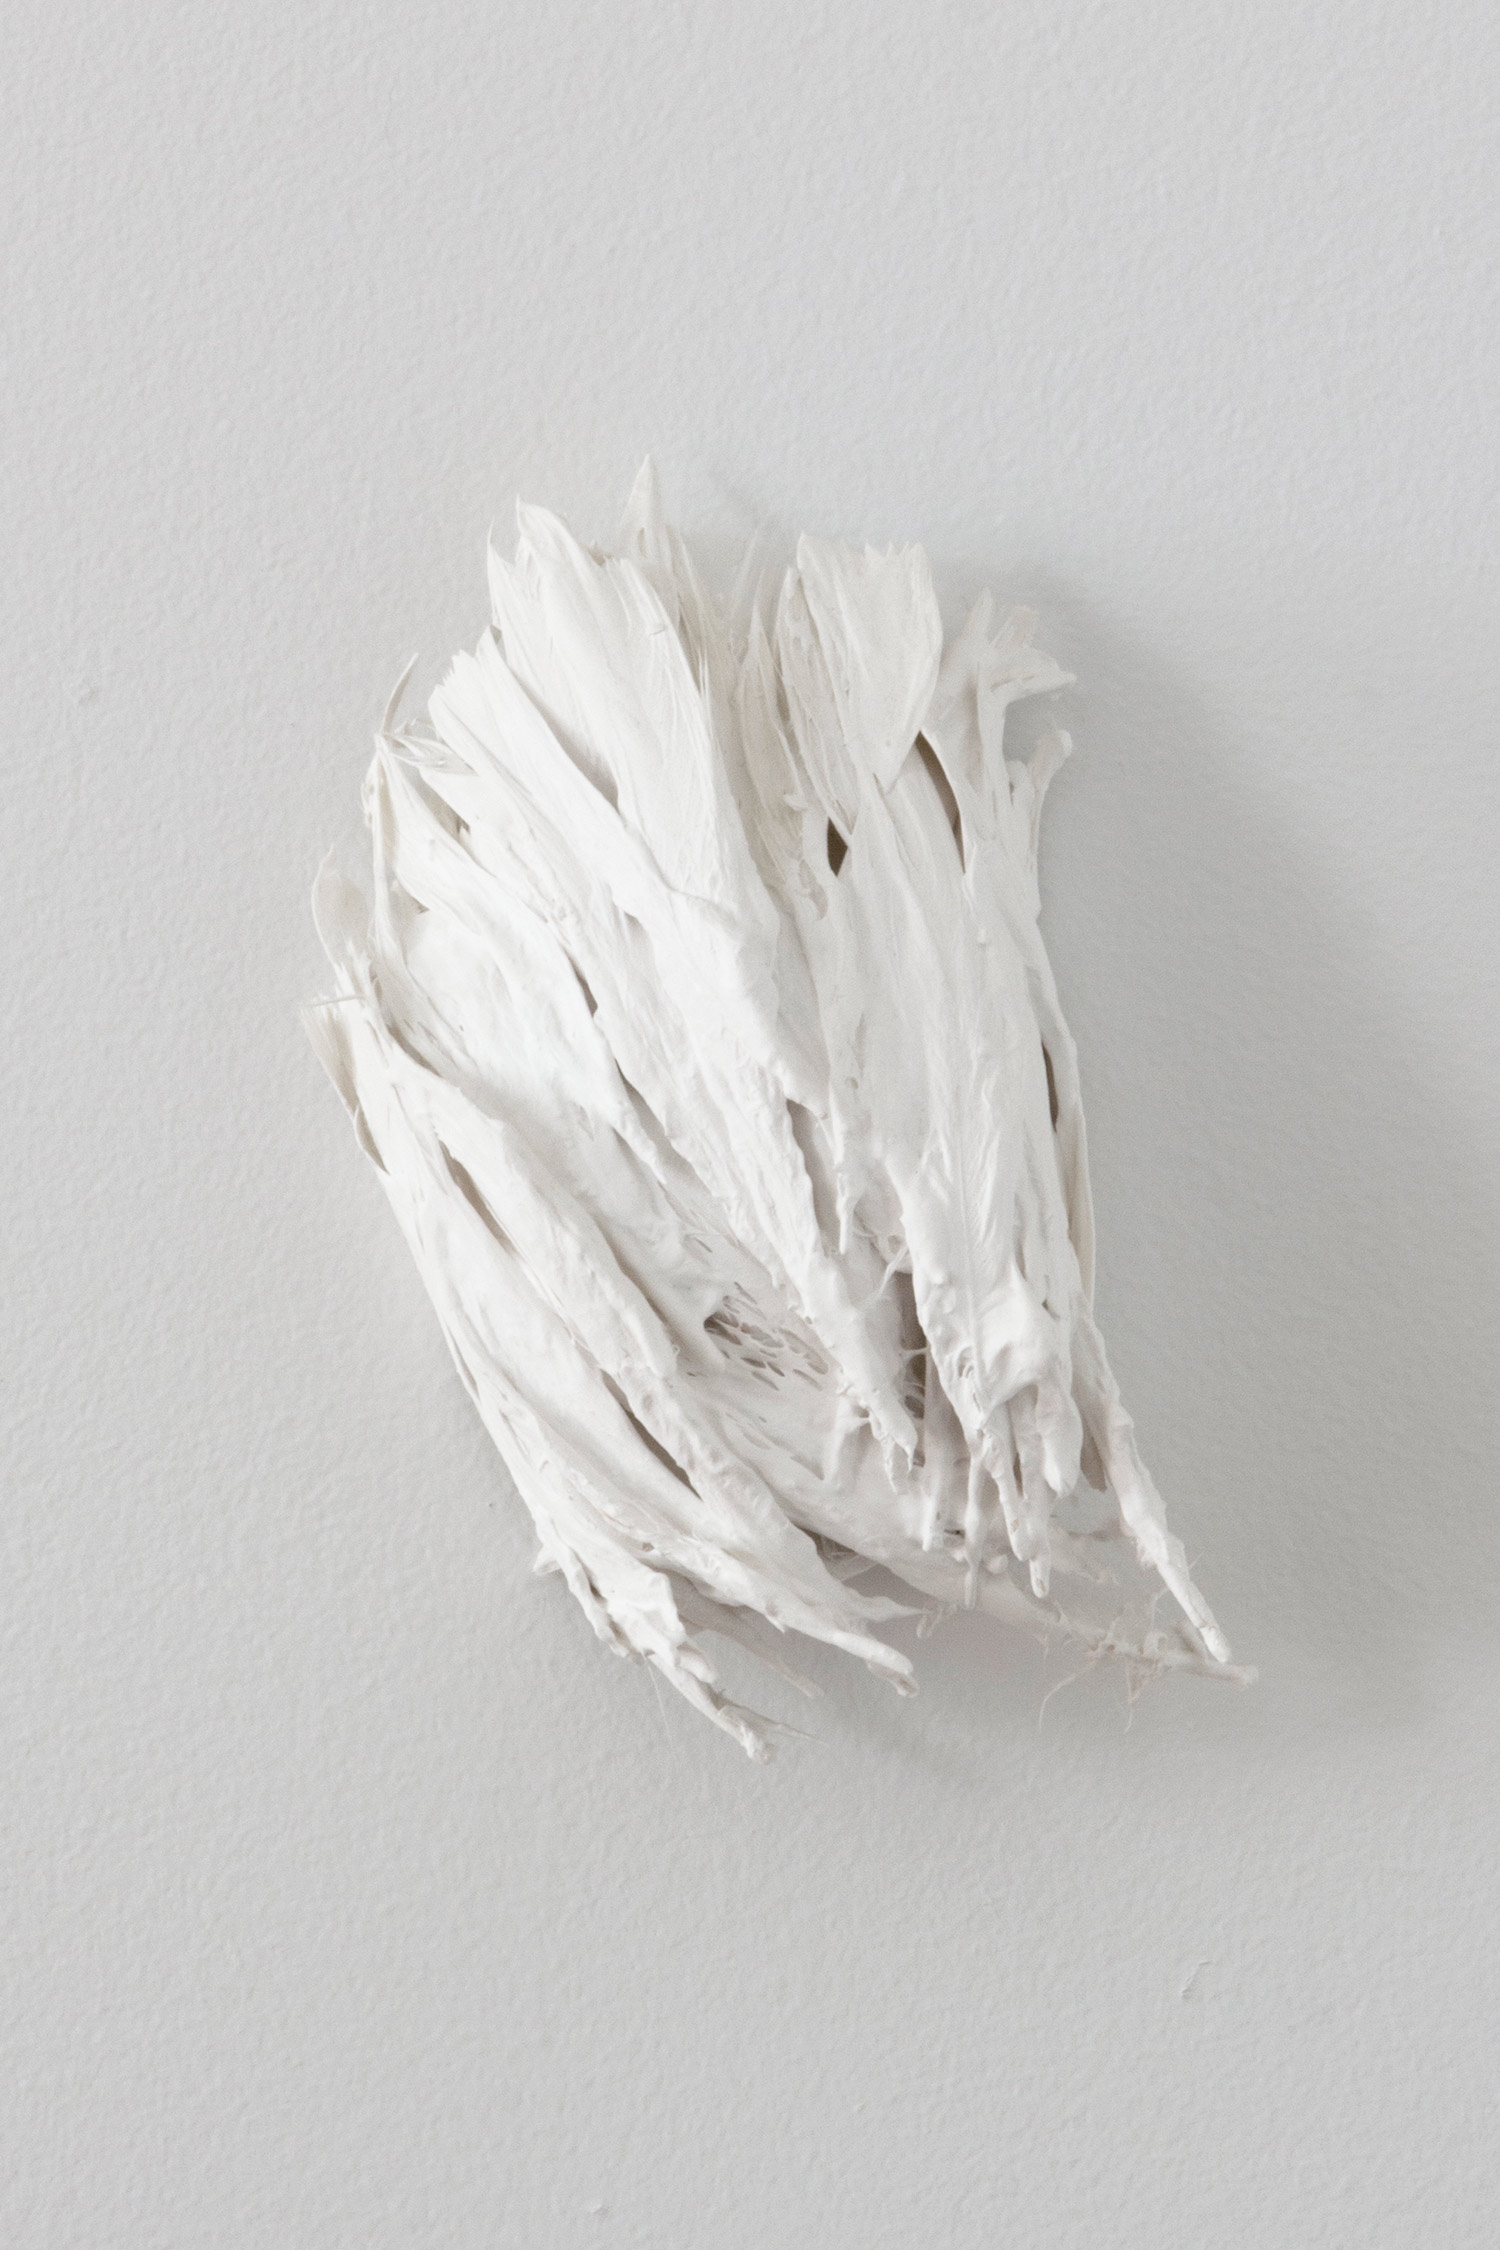    Feders   2014 plaster, feathers 6 x 7 x 3 inches 